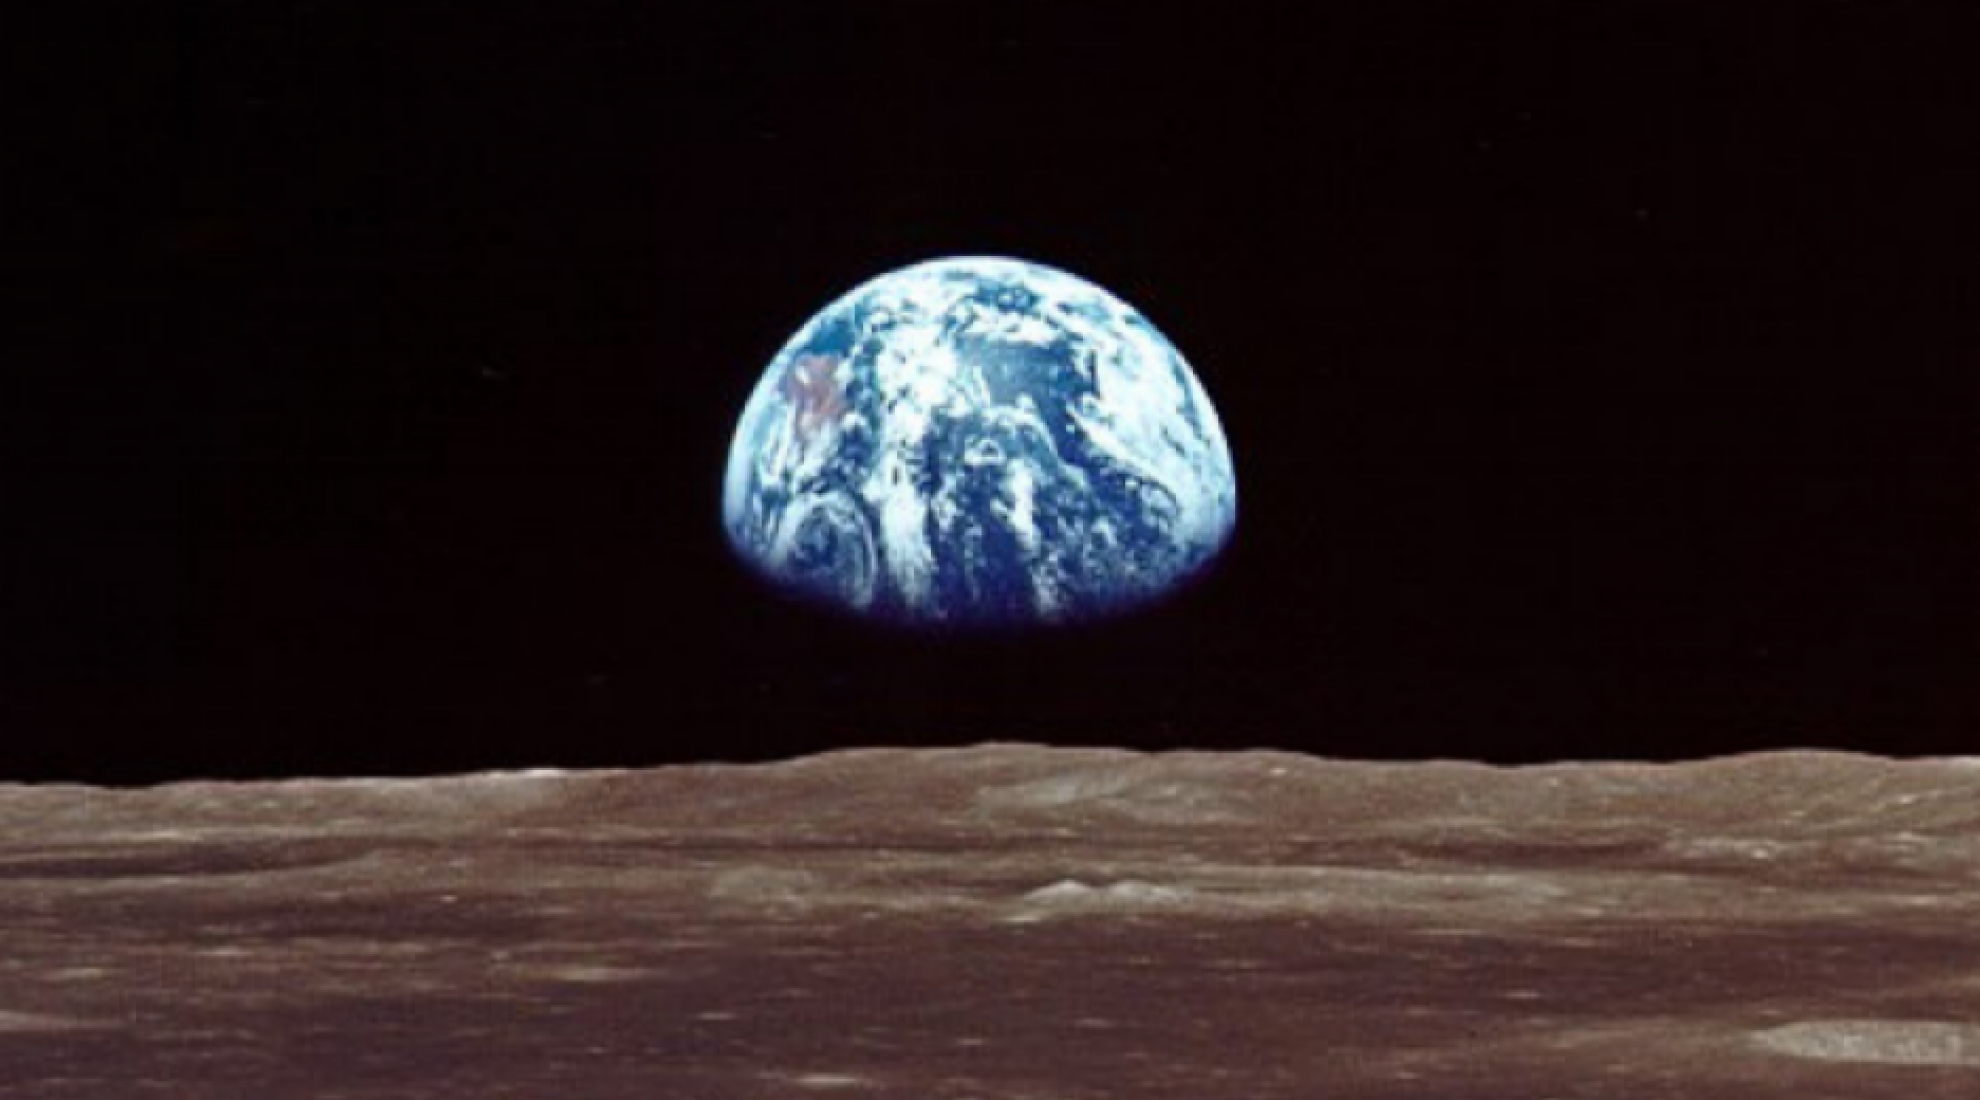  View of the earth from the moon